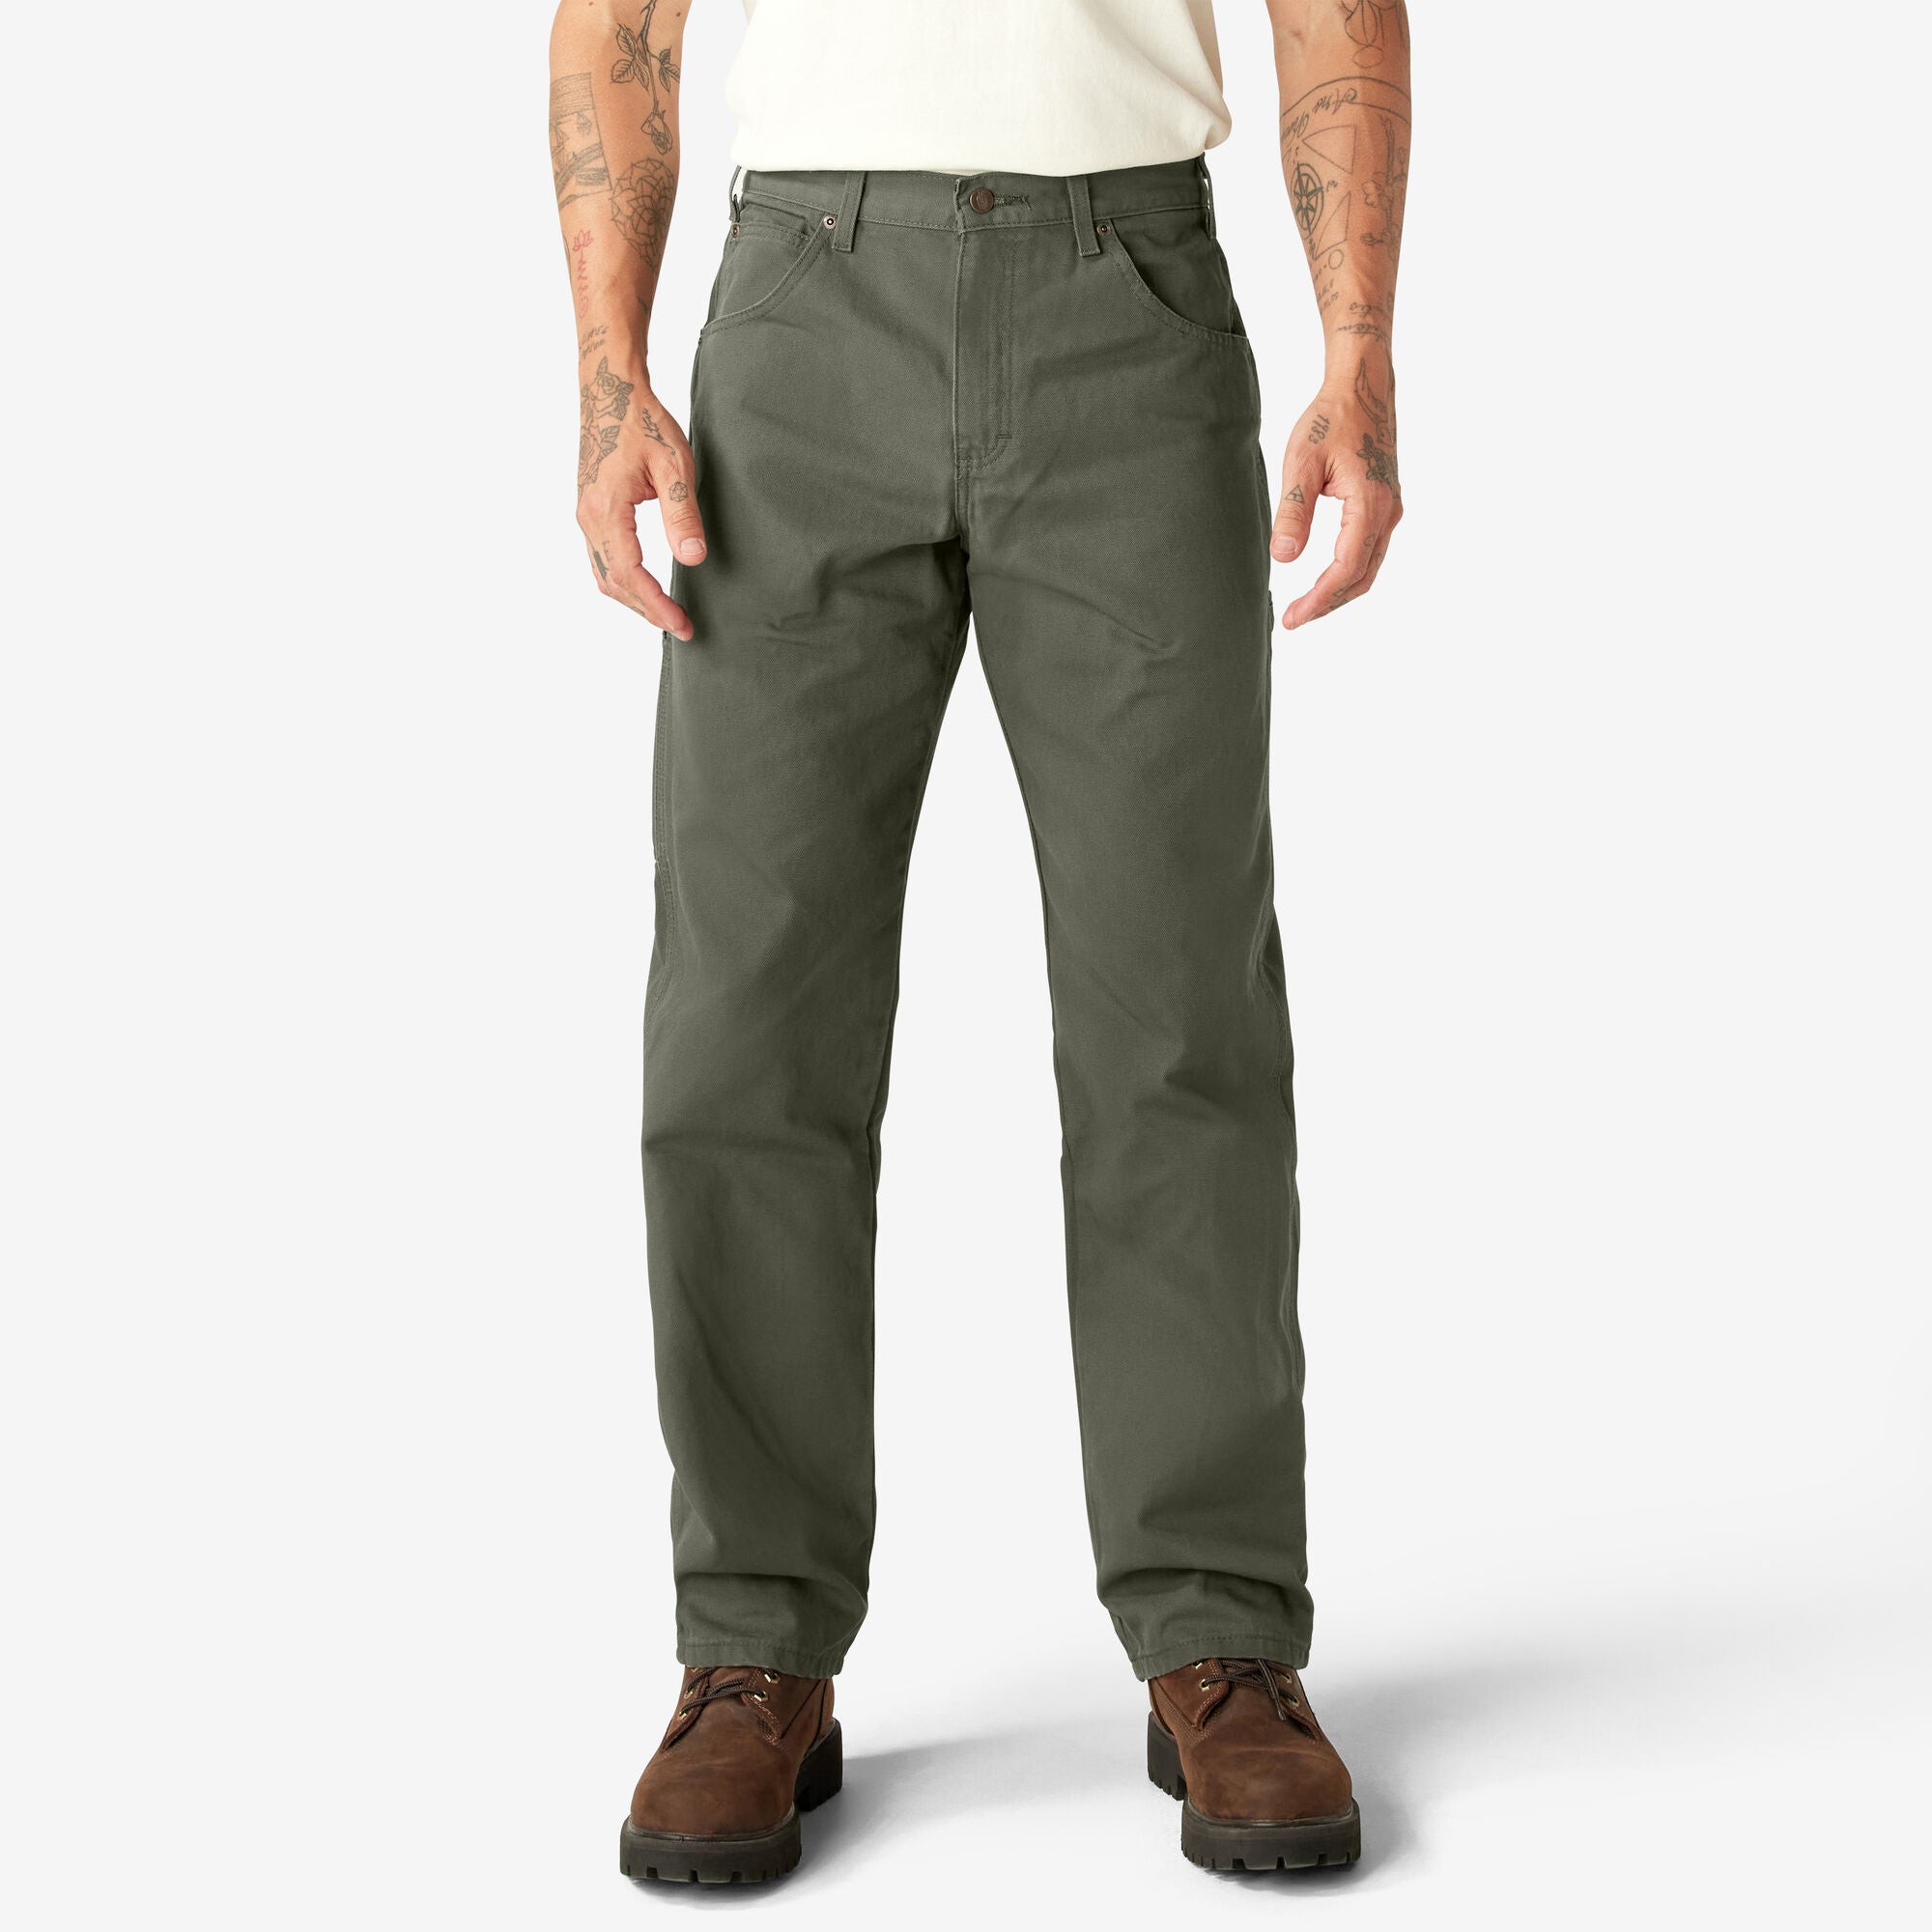 Pants - Dickies Relaxed Fit Heavyweight Duck Carpenter Pants, Rinsed Moss  Green, 1939RMG